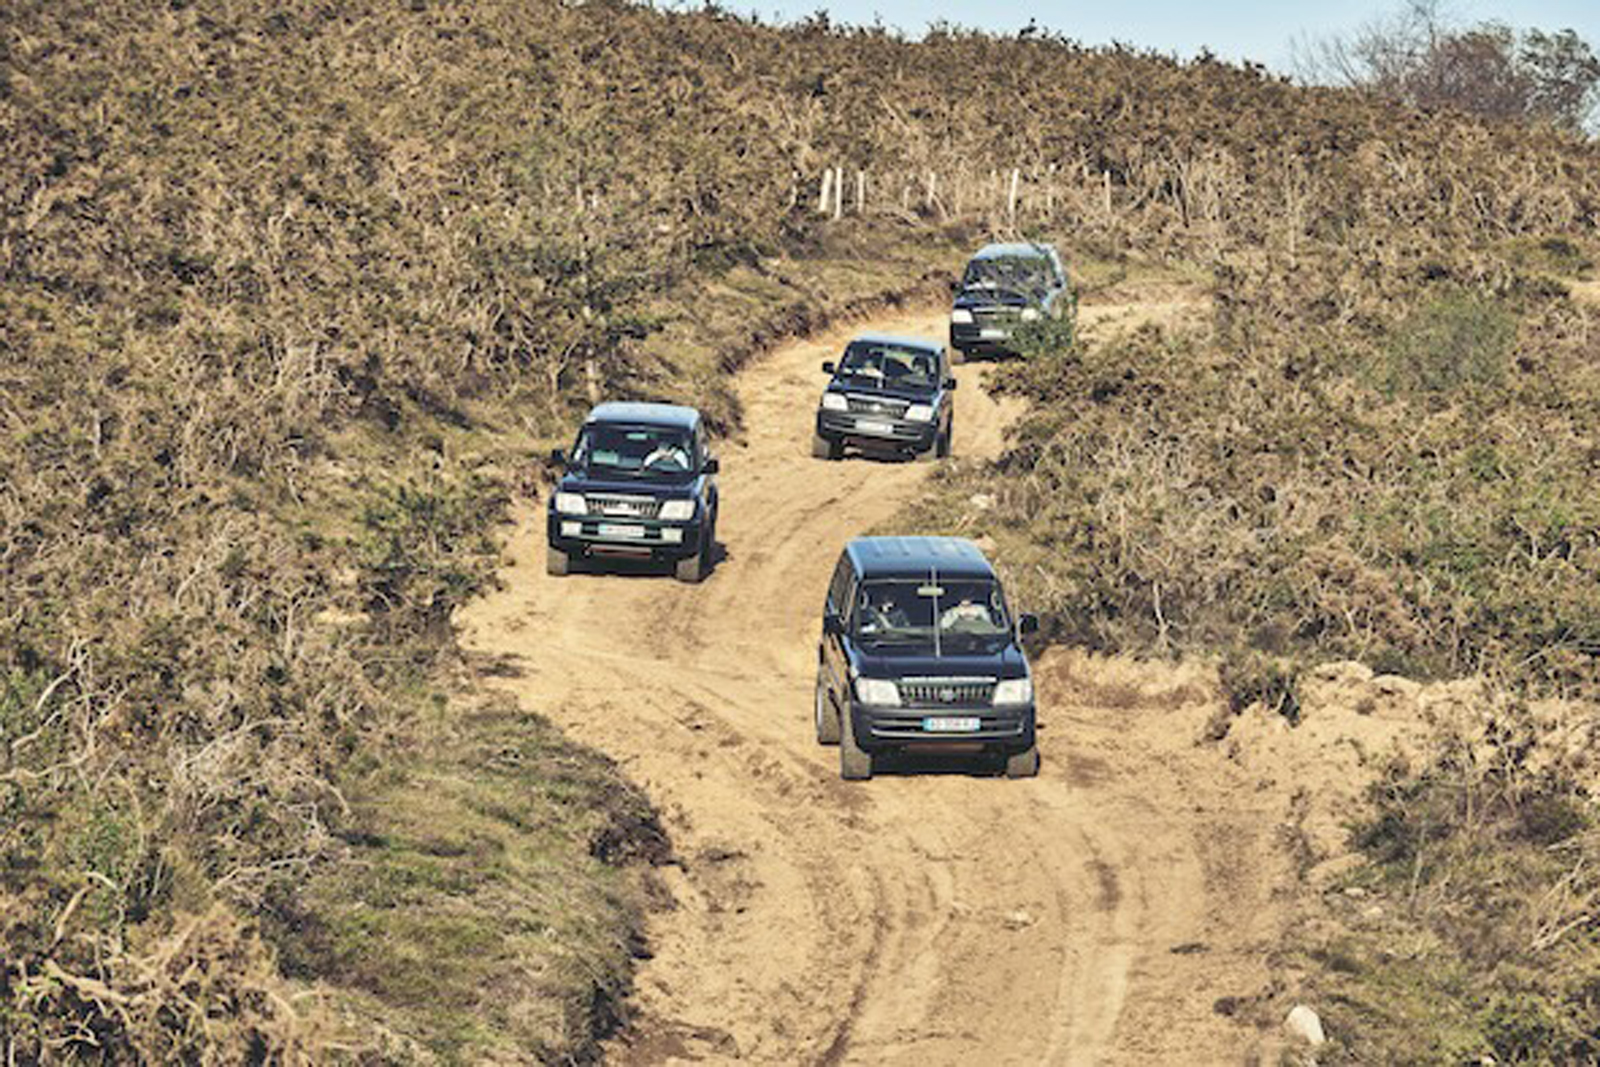 Pays Basque Expérience 4x4 - Guided 4x4 tours of the Basque Country